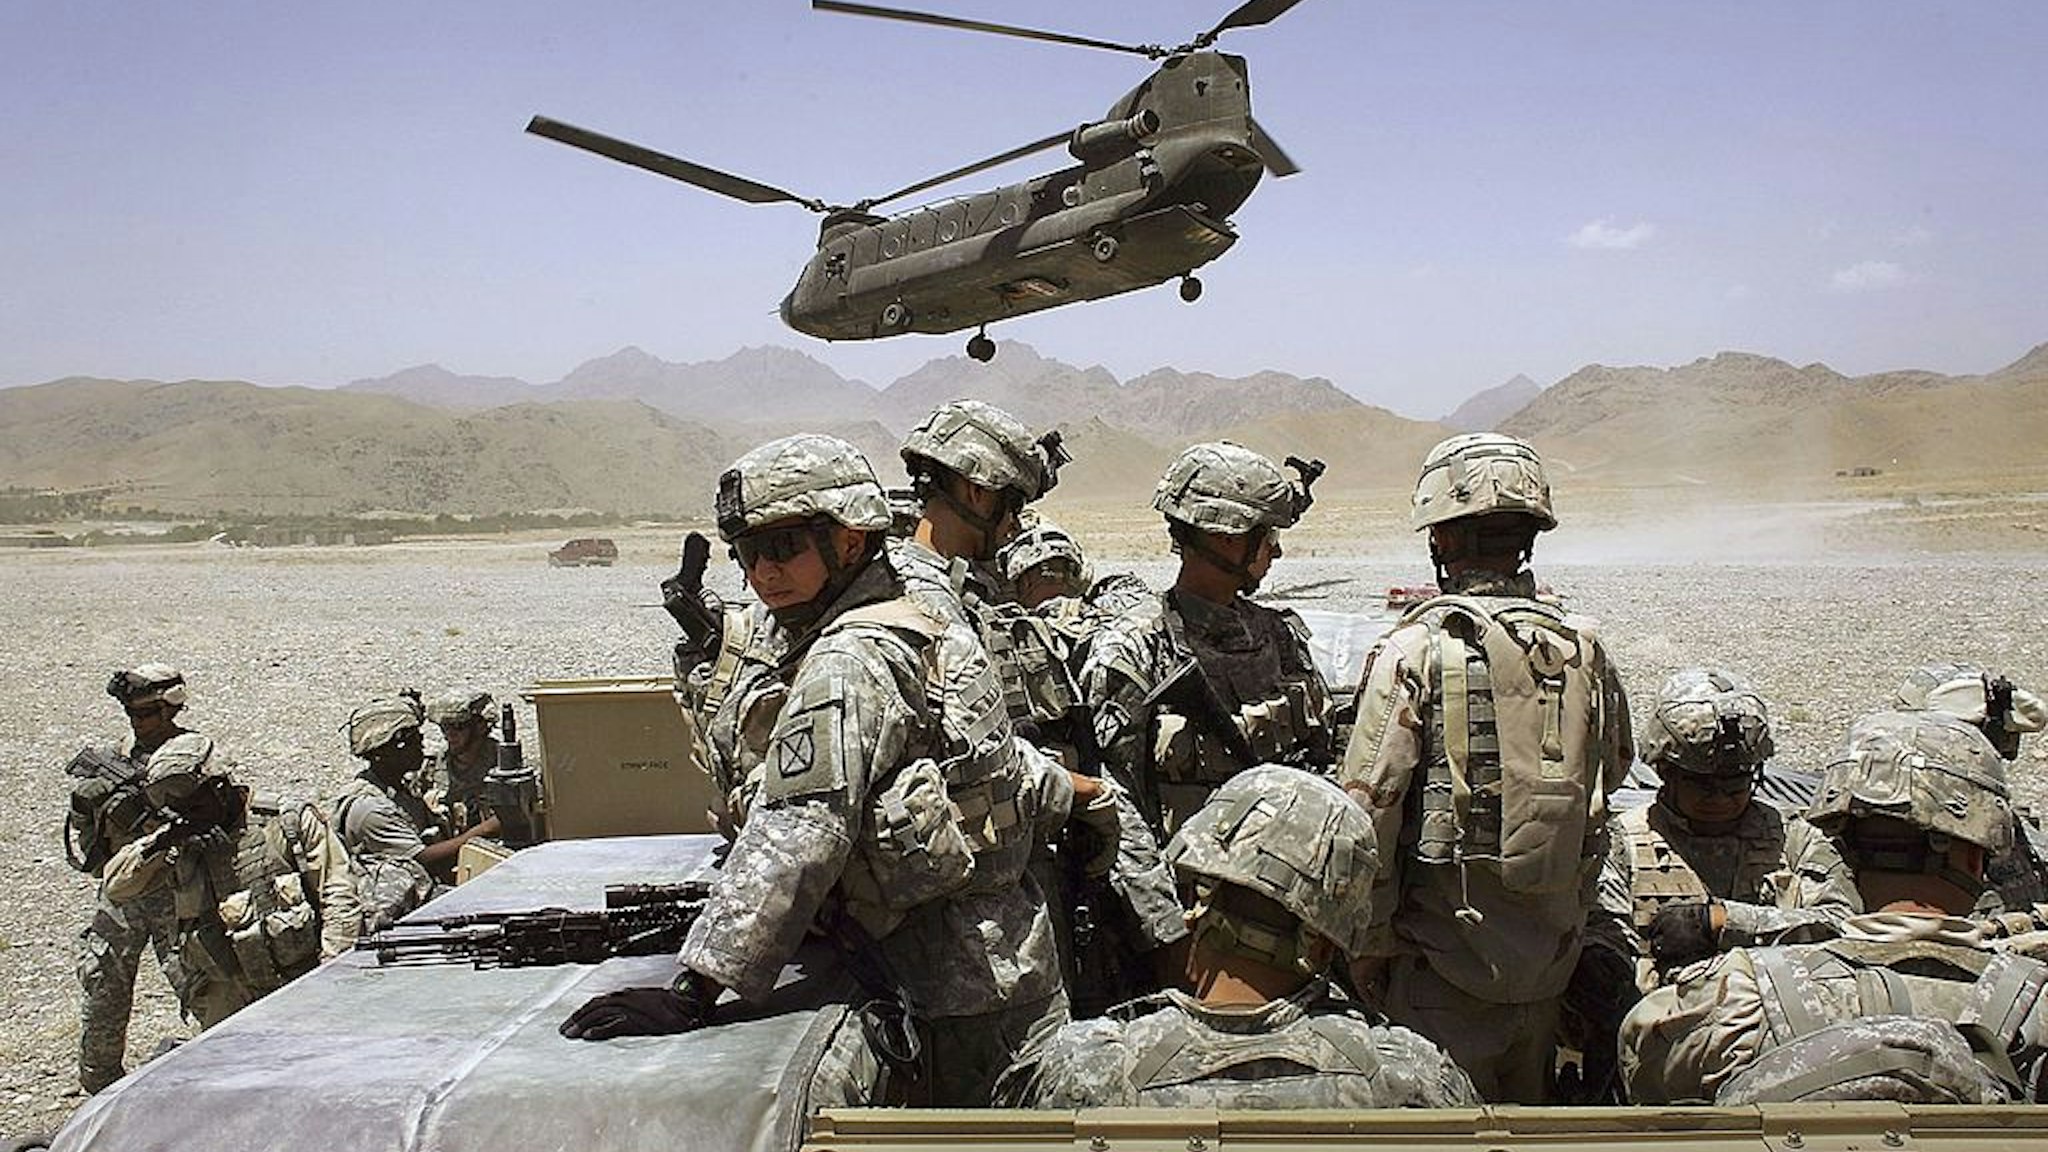 DEH AFGHAN, AFGHANISTAN - JUNE 22: American soldiers from the 10th Mountain Division deploy to fight Taliban fighters as part of Operation Mountain Thrust to a U.S. base near the village of Deh Afghan on June 22, 2006 in the Zabul province of Afghanistan. The US military announced today that four American soldiers were killed in fighting after coalition forces attacked enemy extremists in north-eastern Afghanistan. The anti-Taliban operation, mainly by American, British and Canadian forces, entered it's second week across a vast area in southern Afghanistan. (Photo by John Moore/Getty Images)